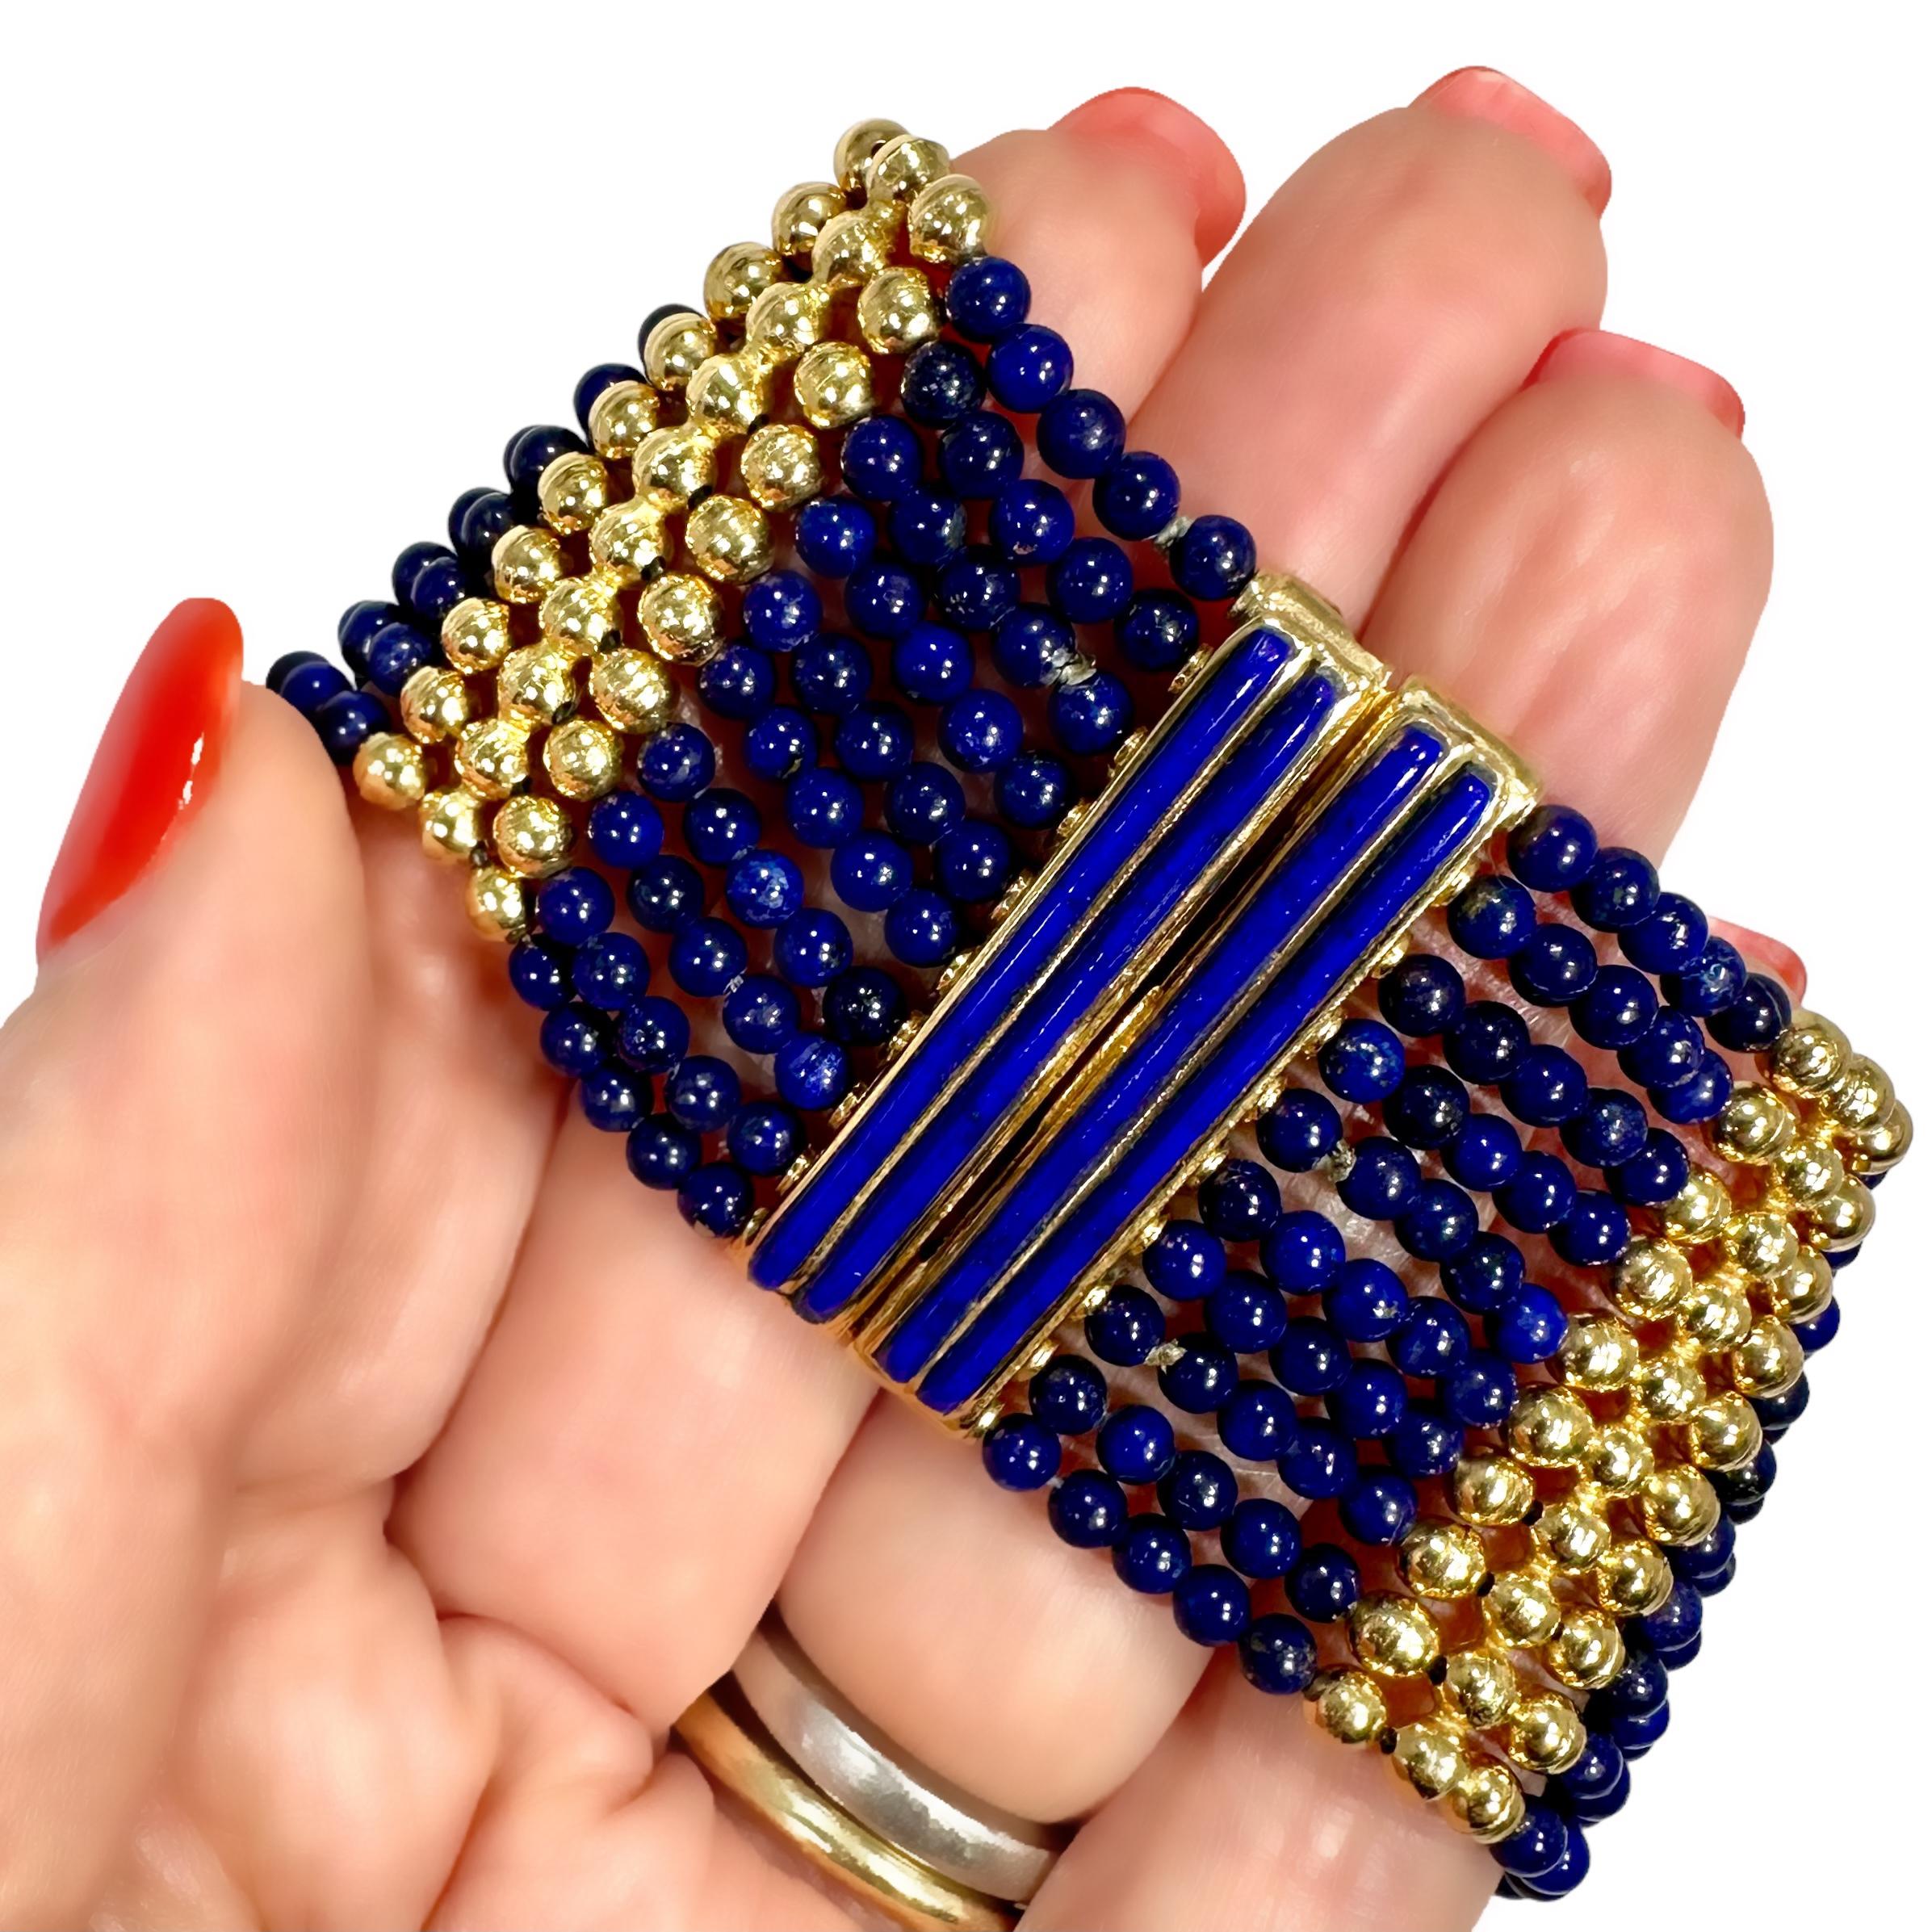 This is the perfect casual 18k yellow gold and lapis bead bracelet that works as well with jeans as it does with any tailored attire. Ten separate strands of luxurious blue 3mm lapis-lazuli beads are punctuated by seven three row 18K gold bead